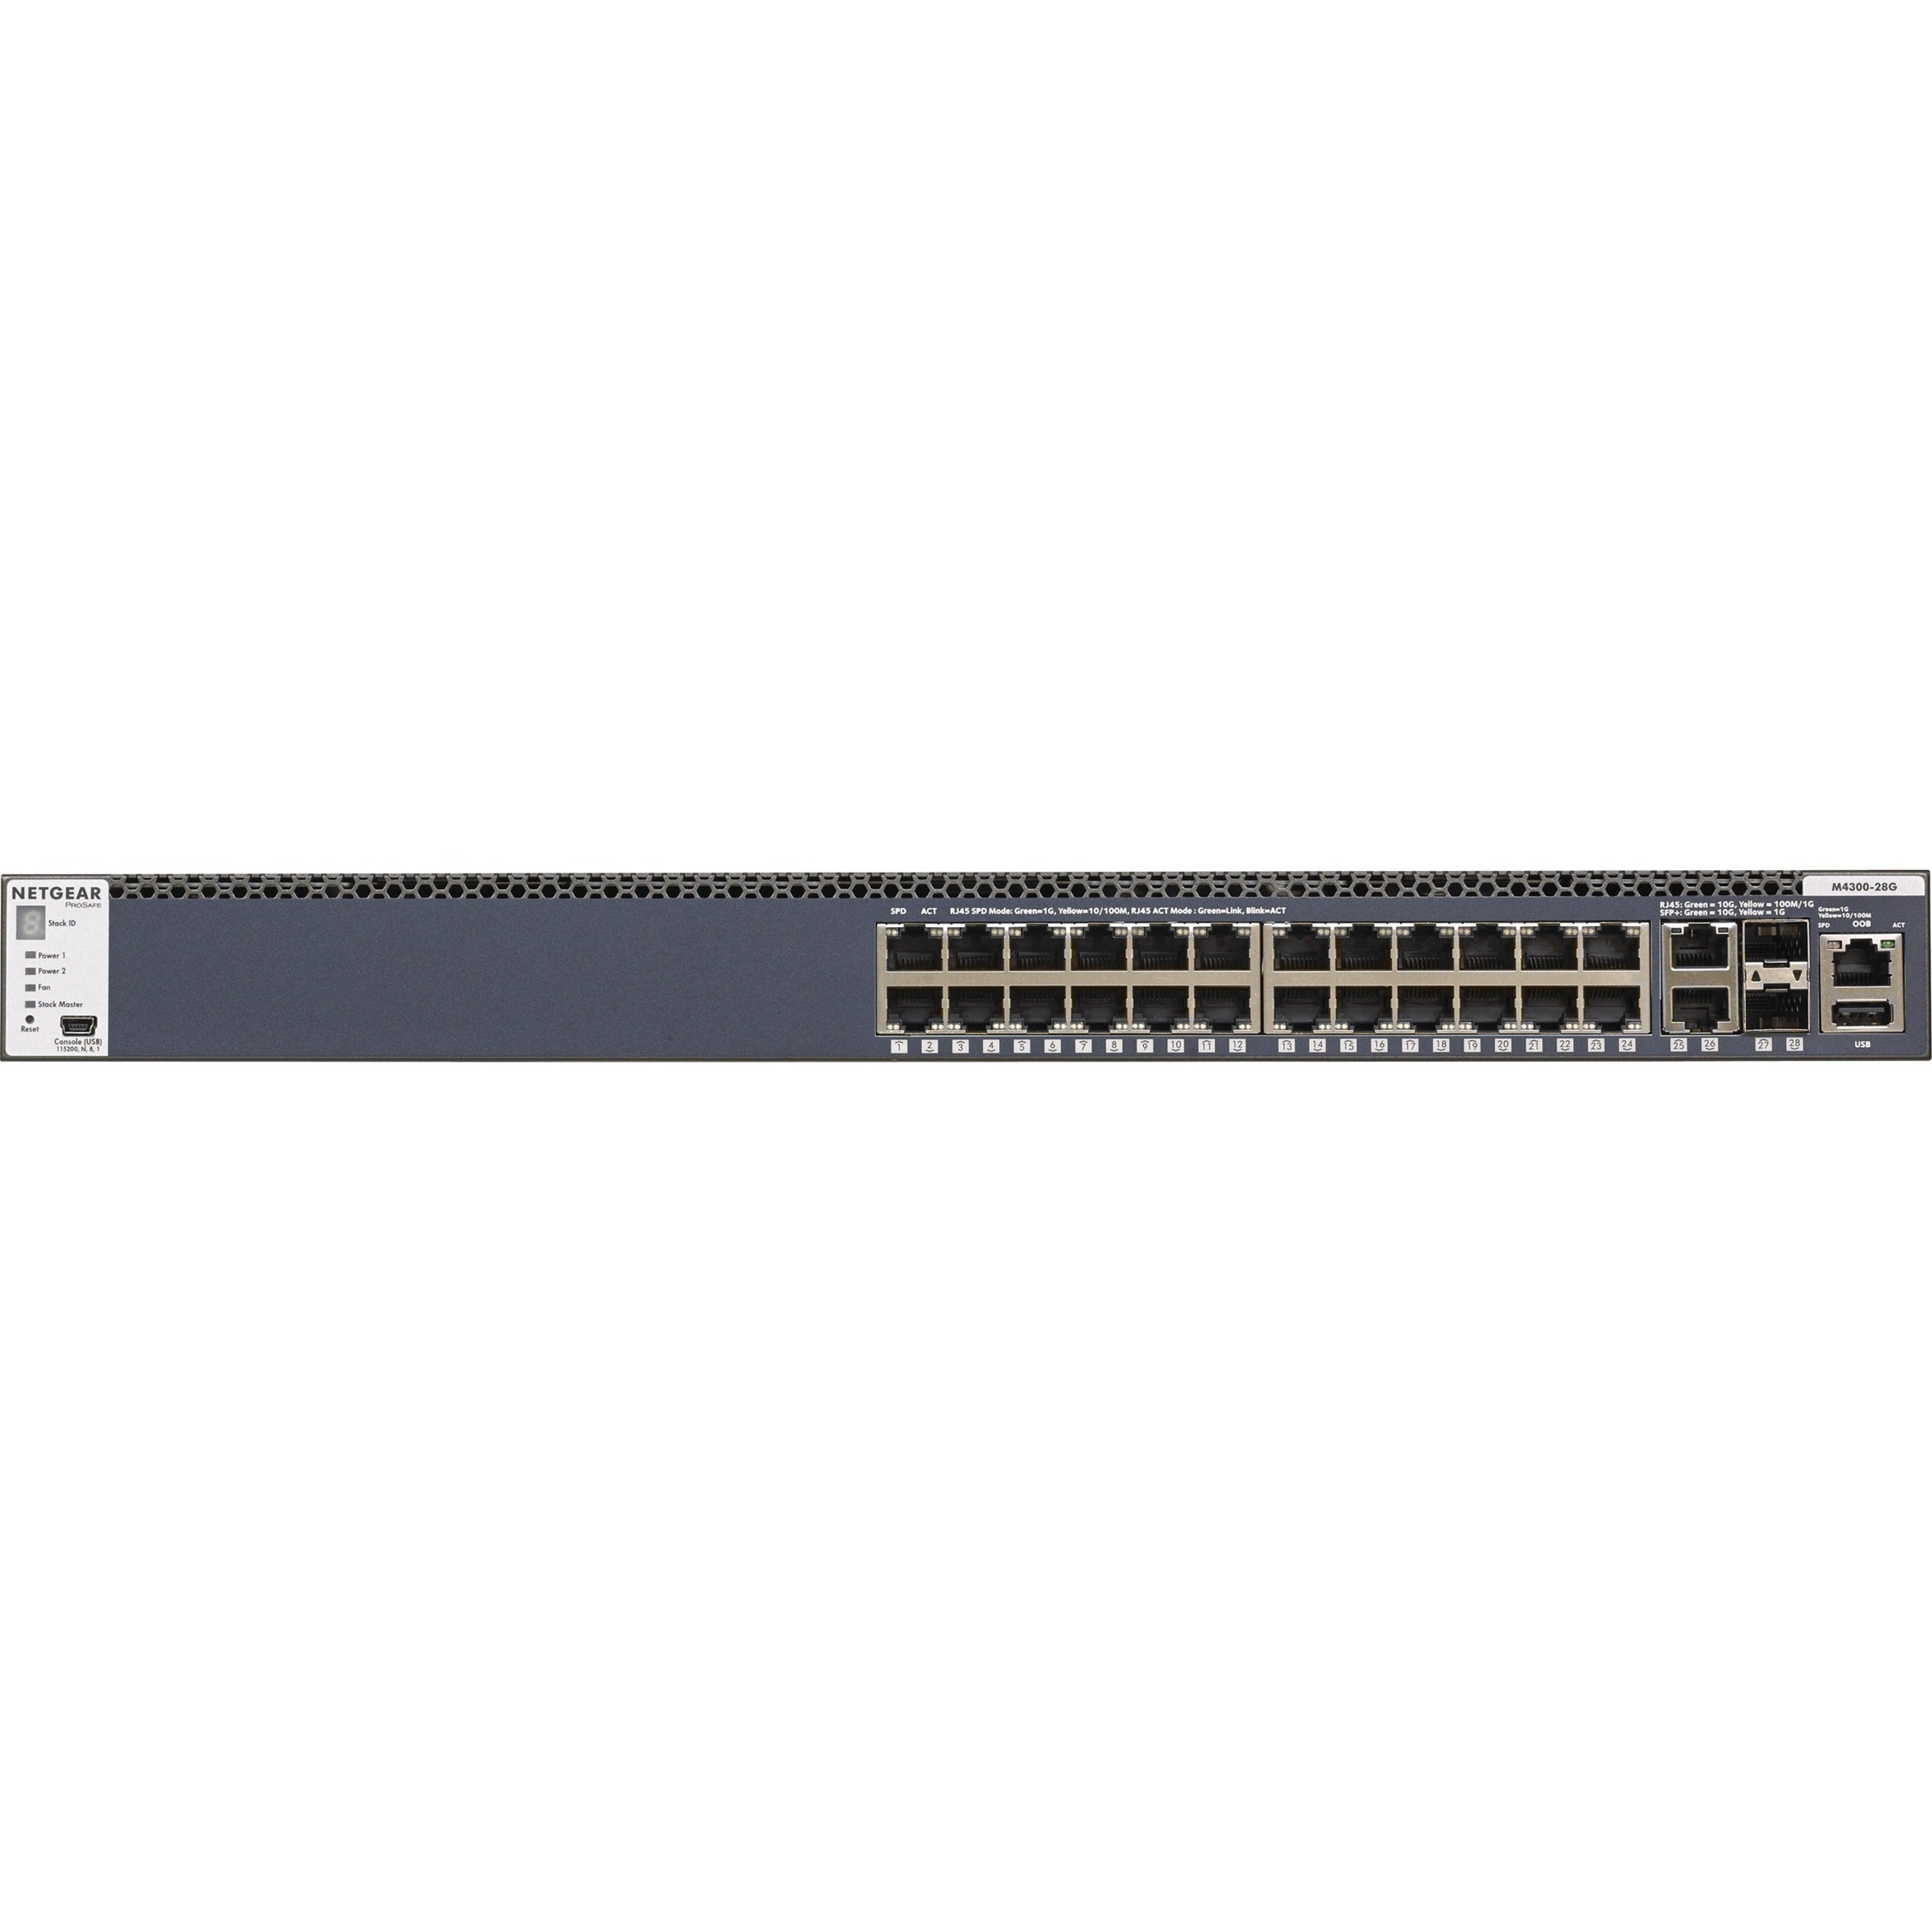 Netgear GSM4328S-100NES M4300-28G ProSafe Managed Switch 24x1G Stackable 2x10GBASE-T and 2xSFP+ Layer 3 Switch